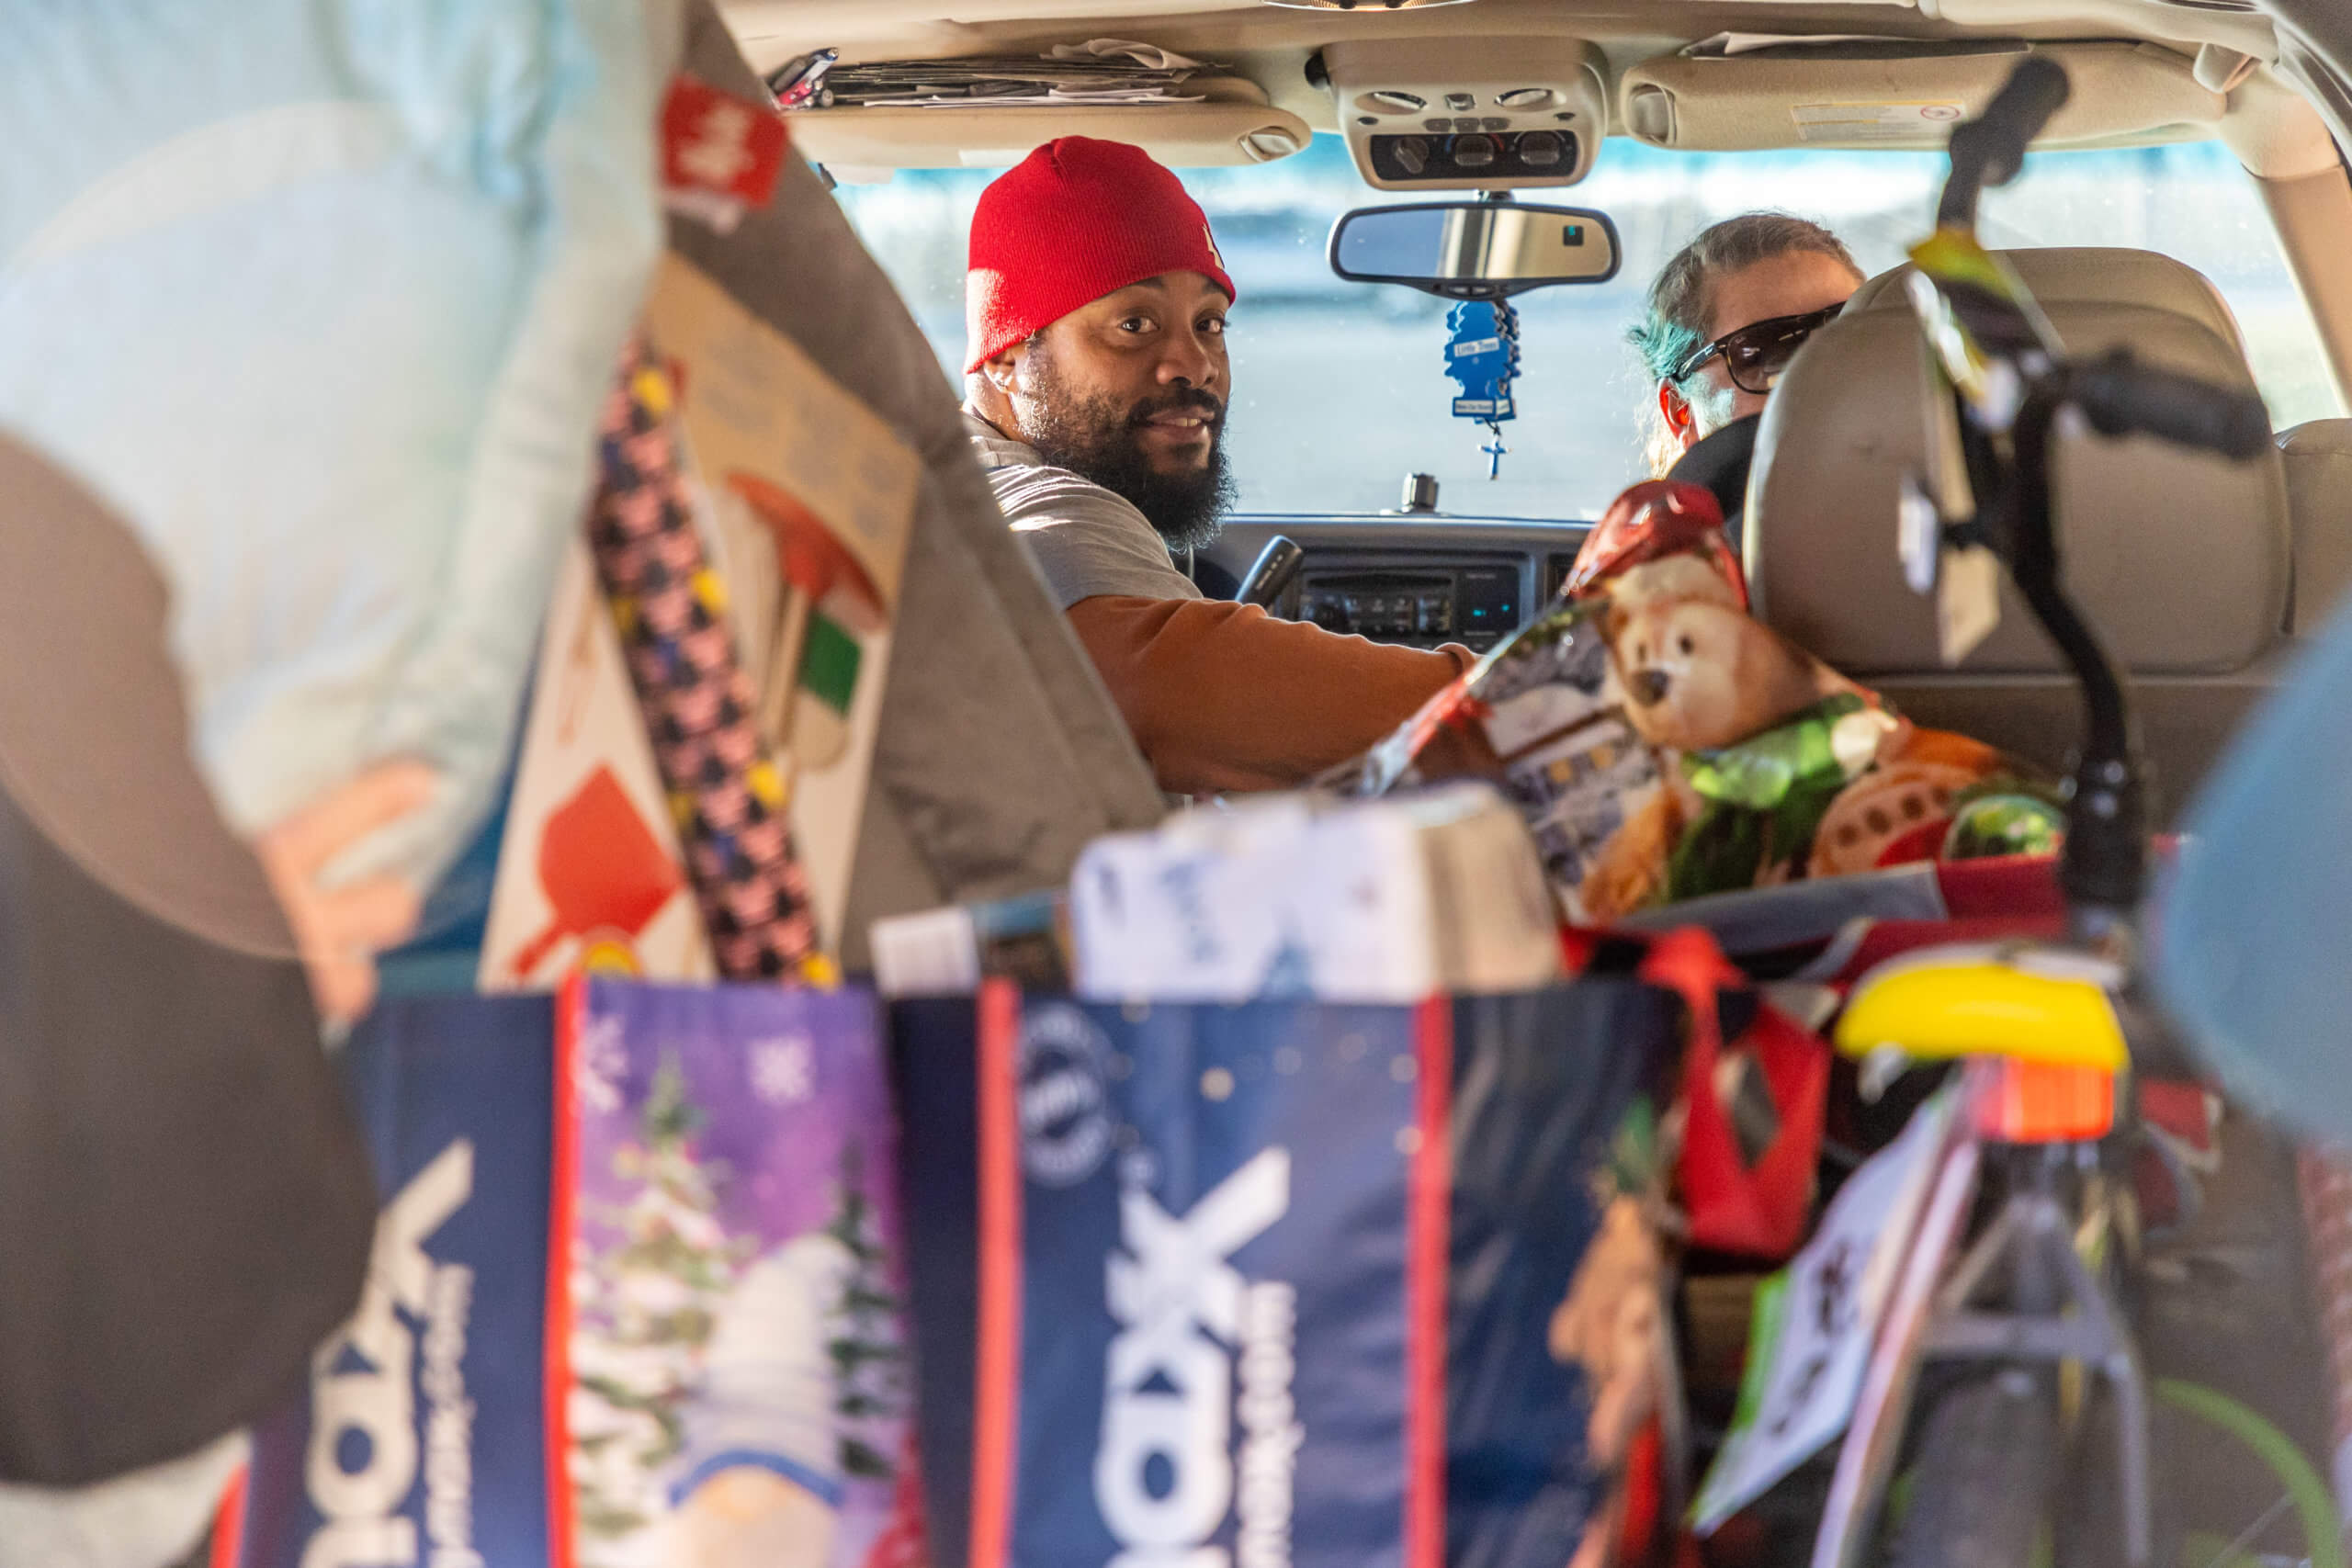 Give Joy recipient surrounded by gifts in car